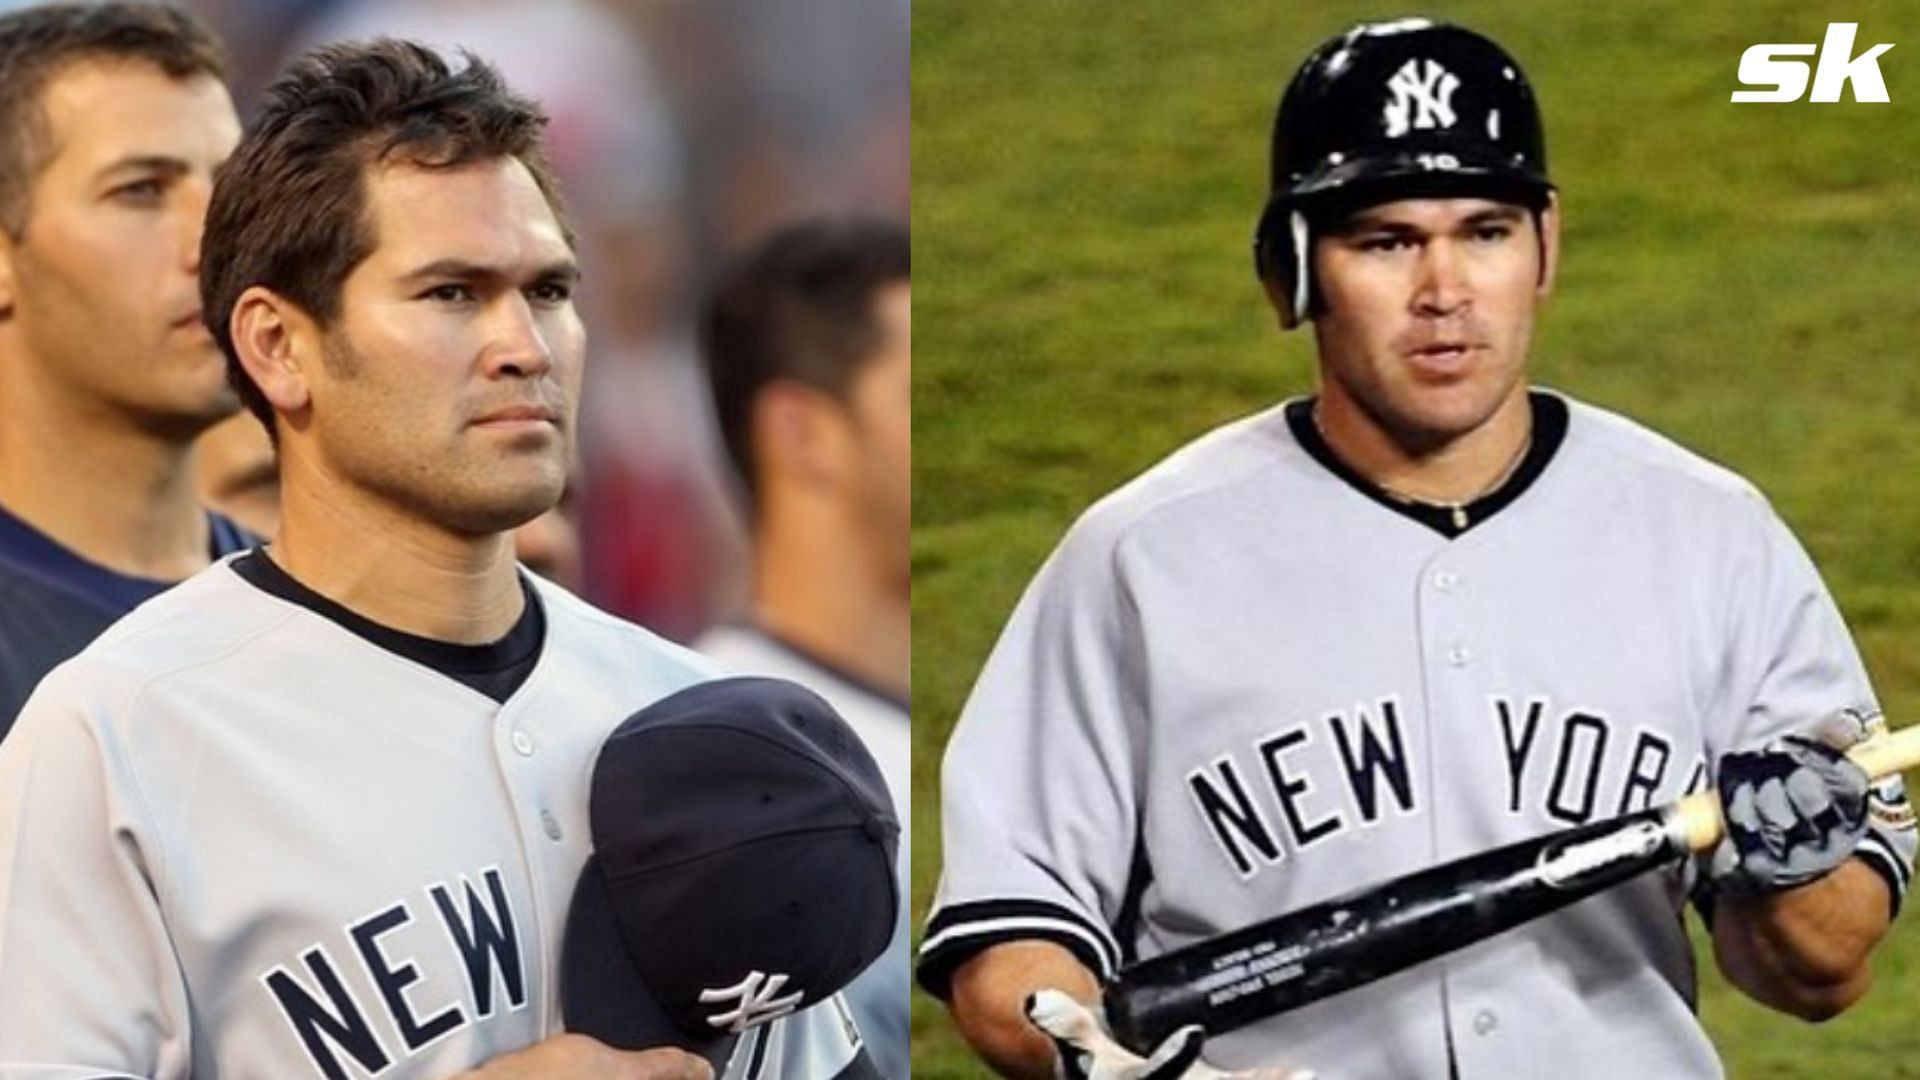 When Johnny Damon expressed relief in 2013 at never using PEDs, unlike Alex  Rodriguez